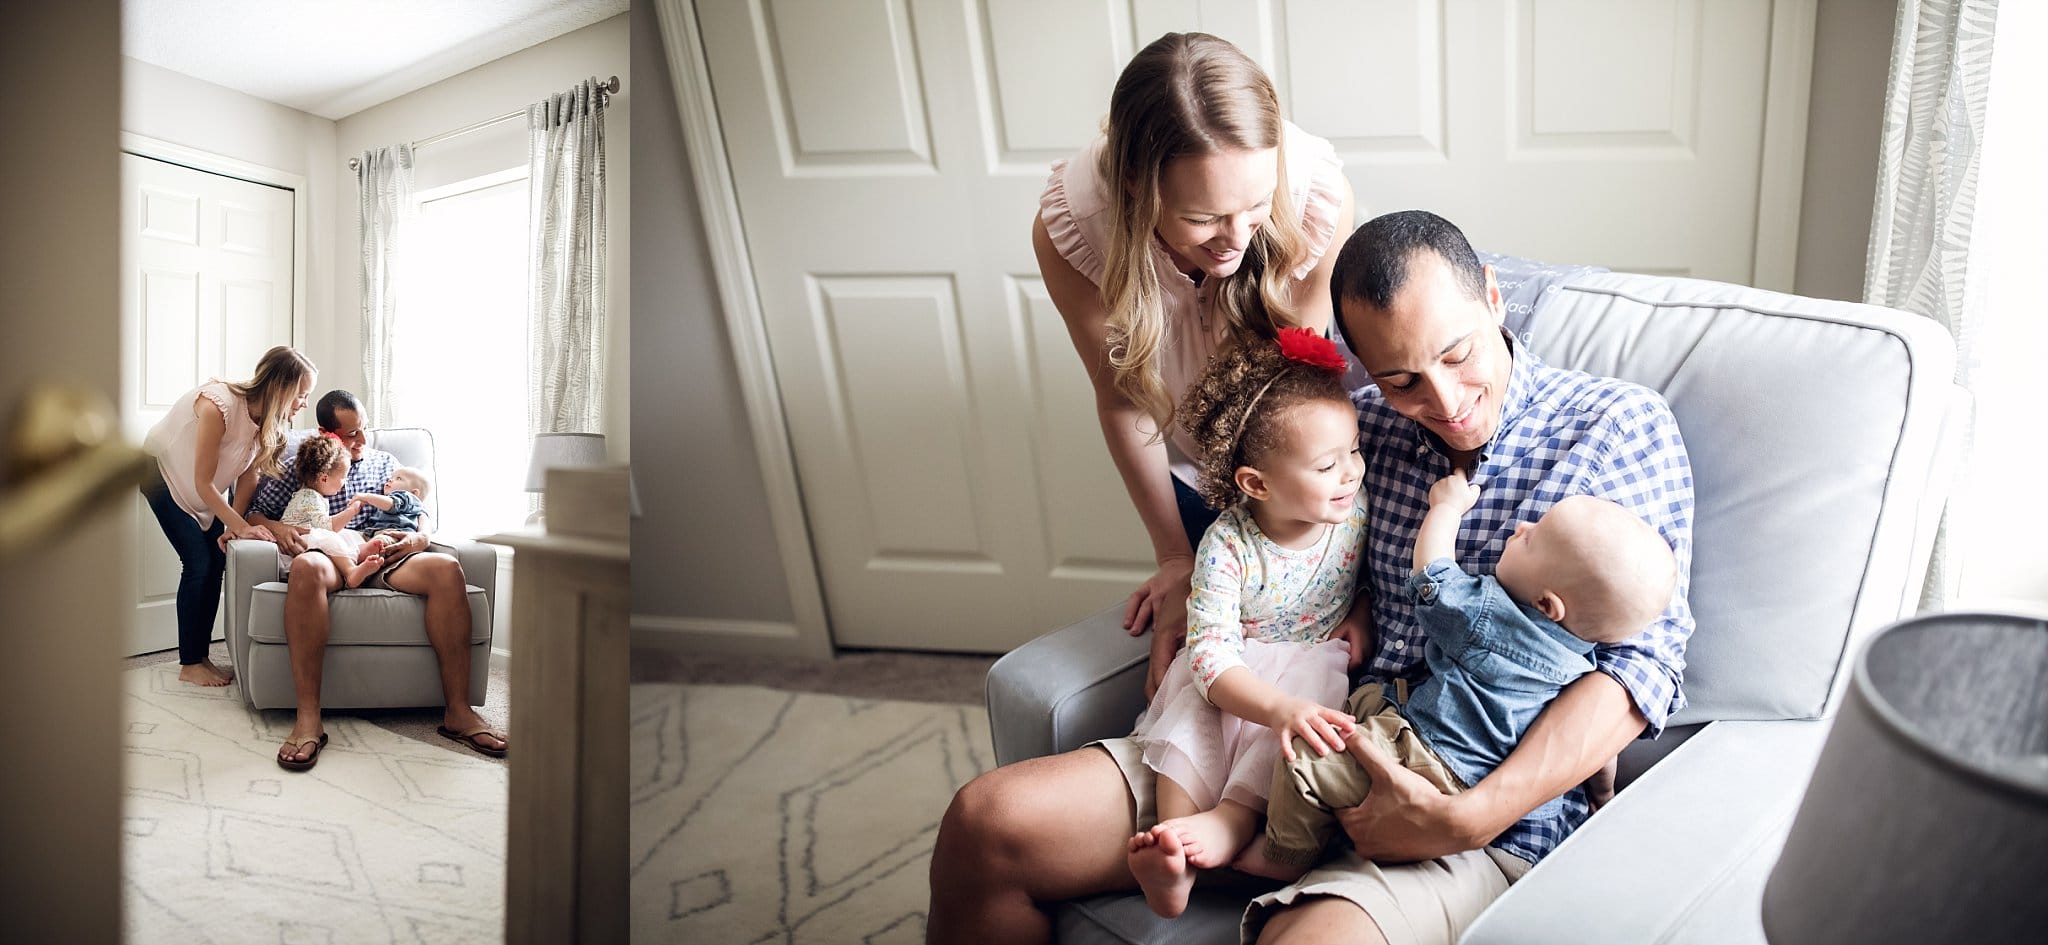 St Augustine Lifestyle Photographer dad snuggling with 2 kids in baby nursery as mom looks on